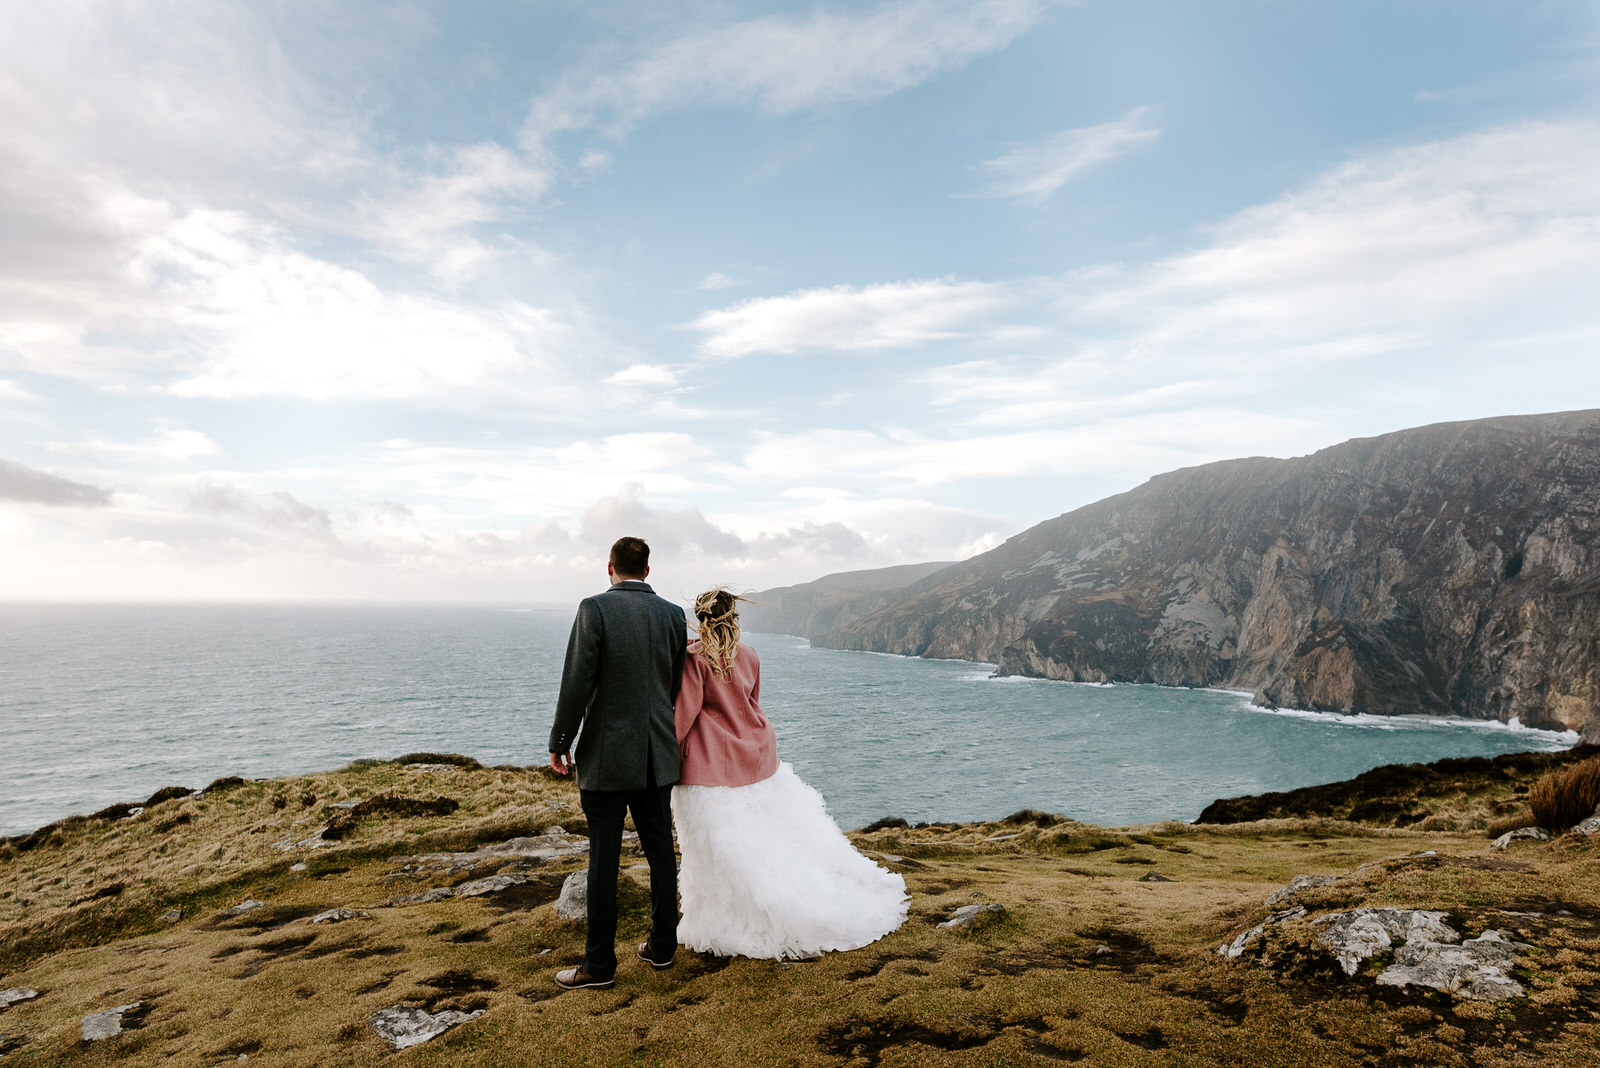 eloping ideas for couples planning their elopement